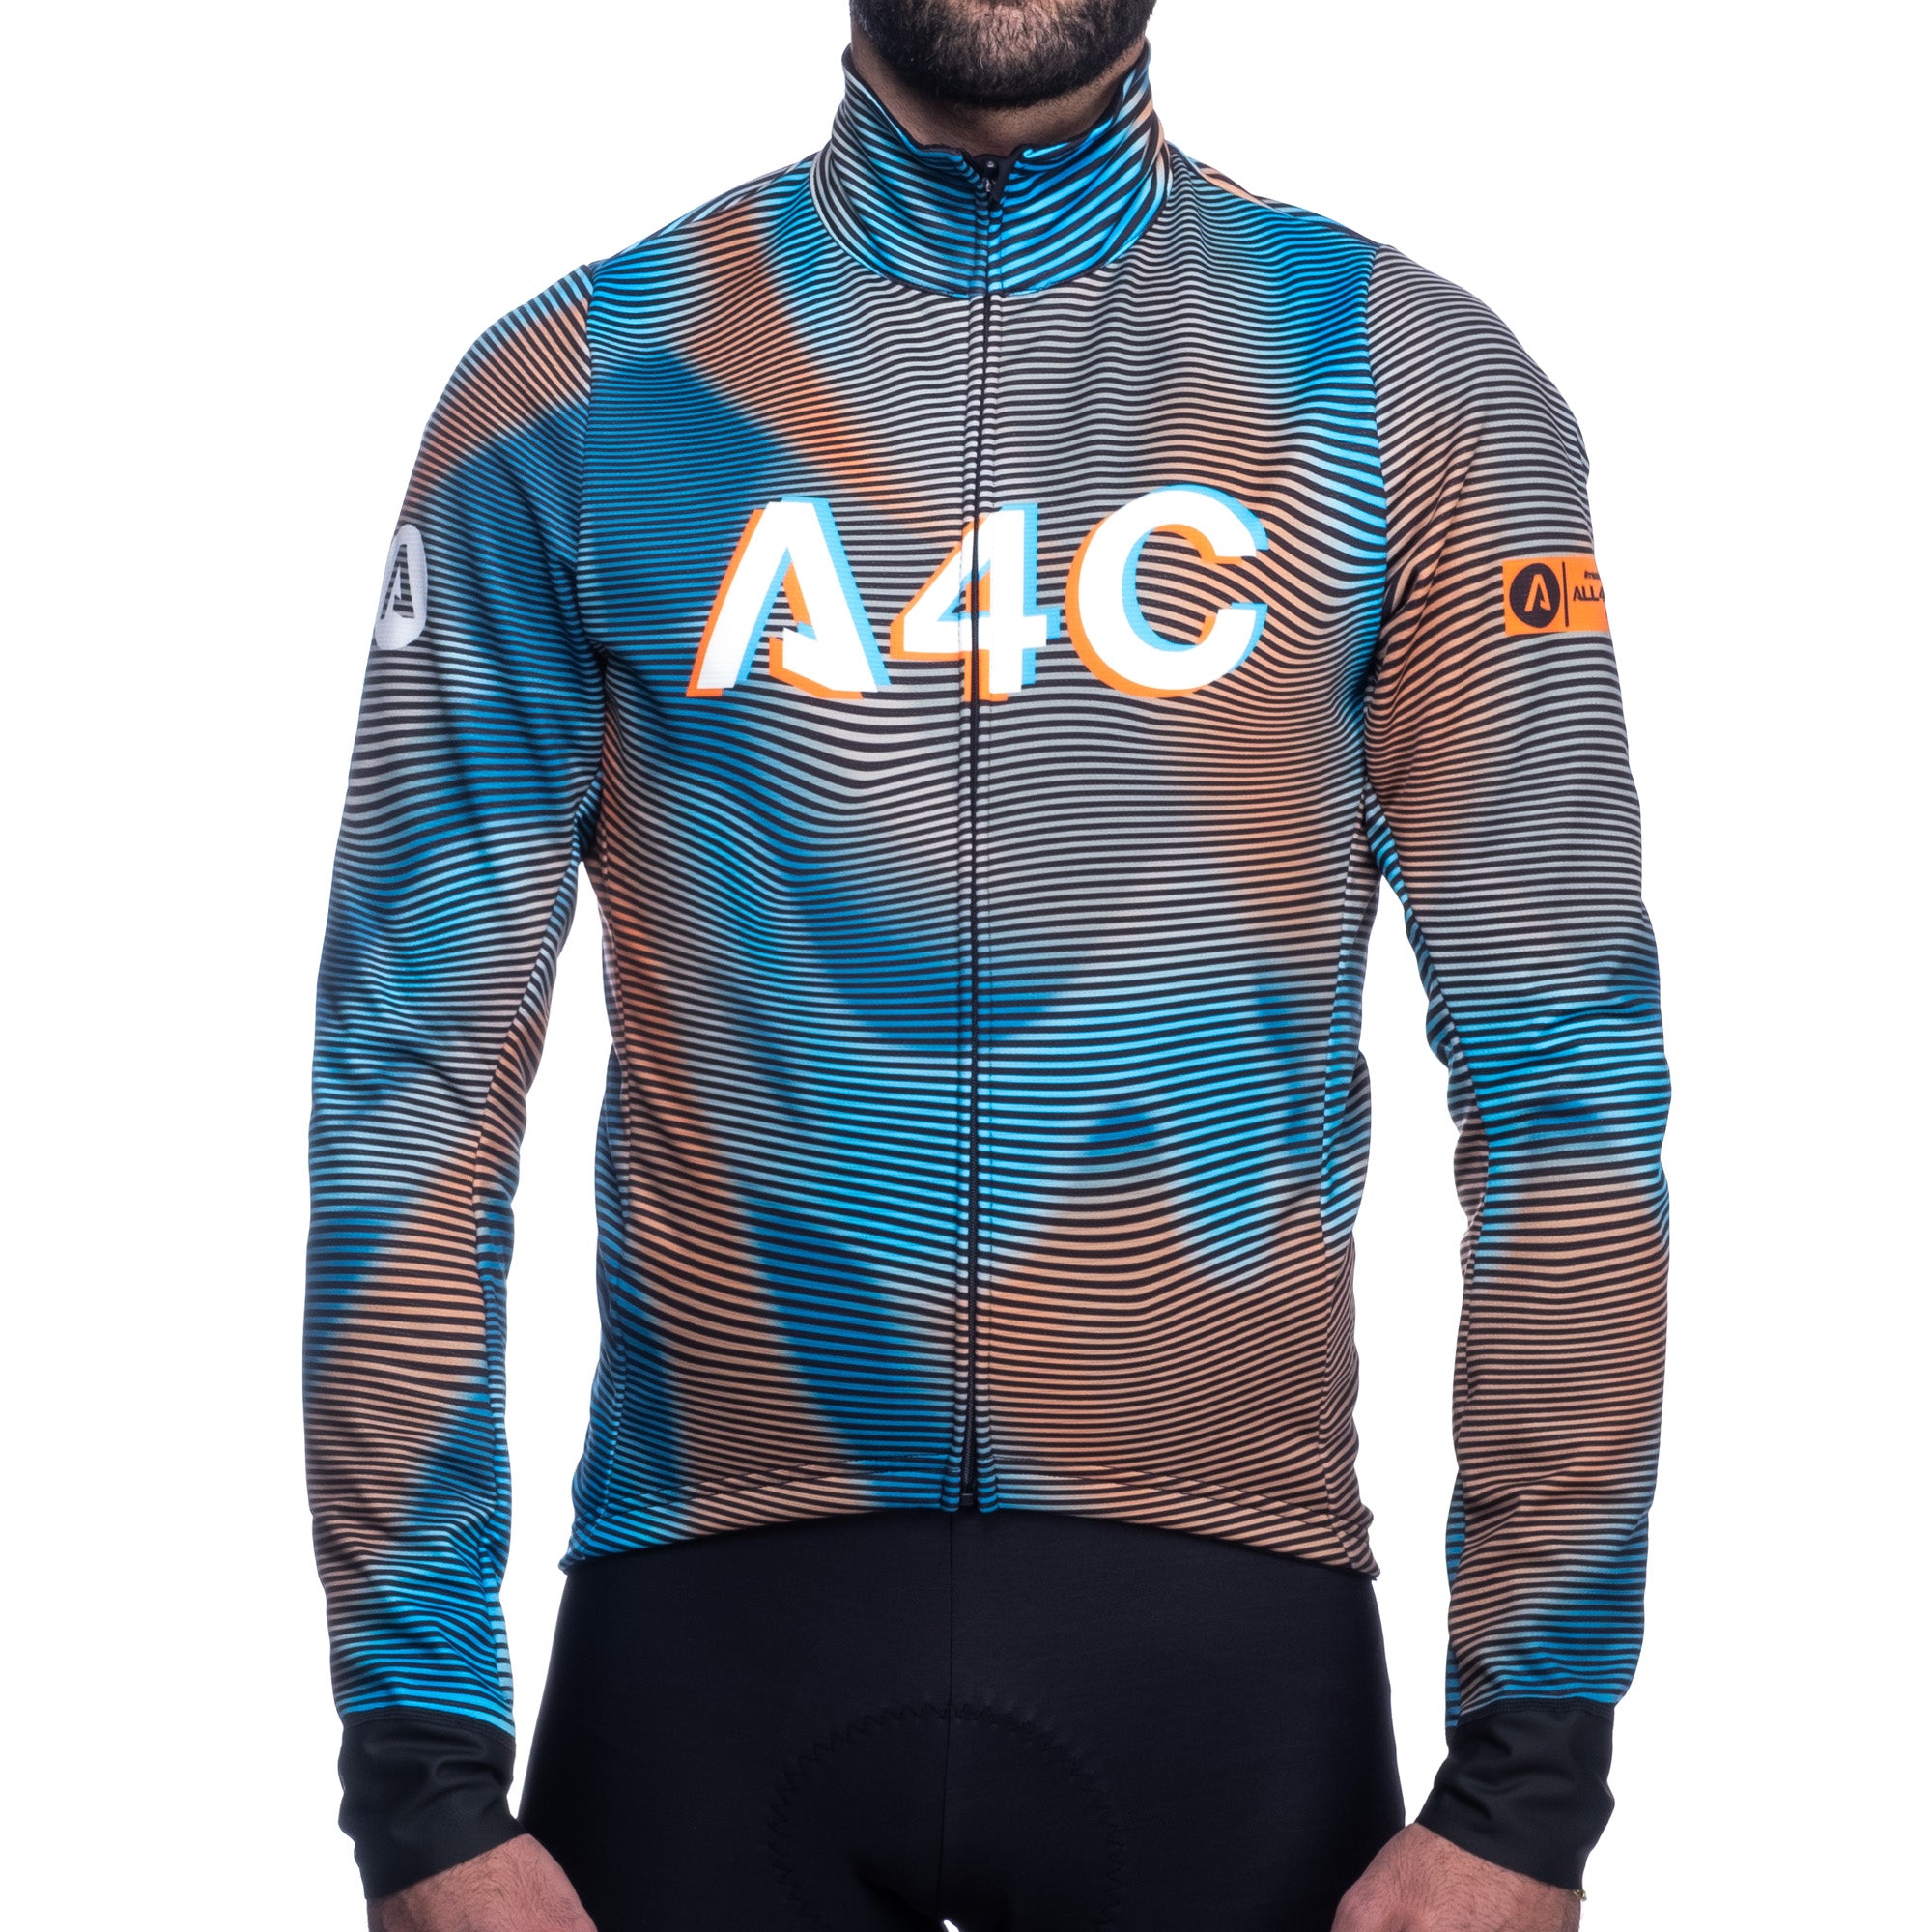 All4cycling Team jacket